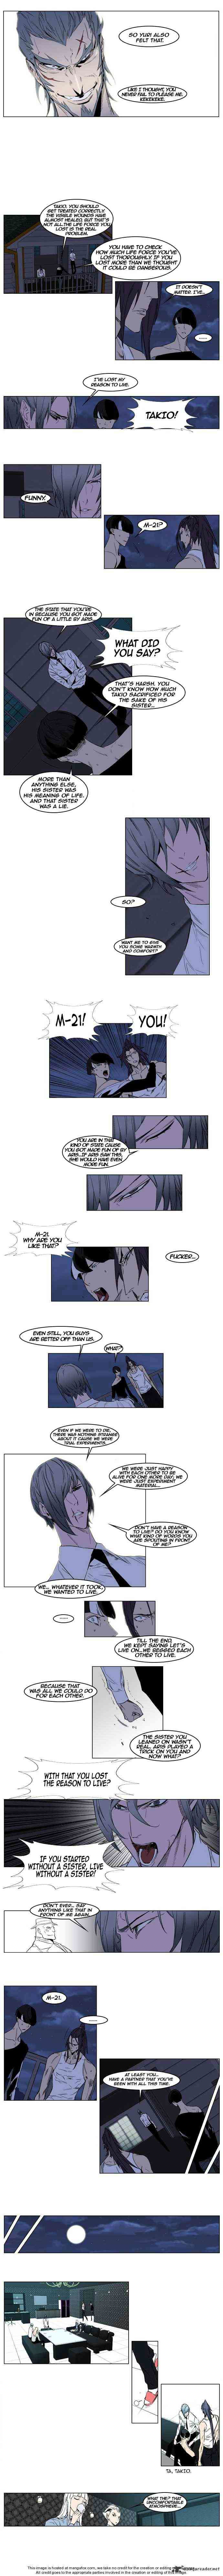 Noblesse Chapter 153 page 2